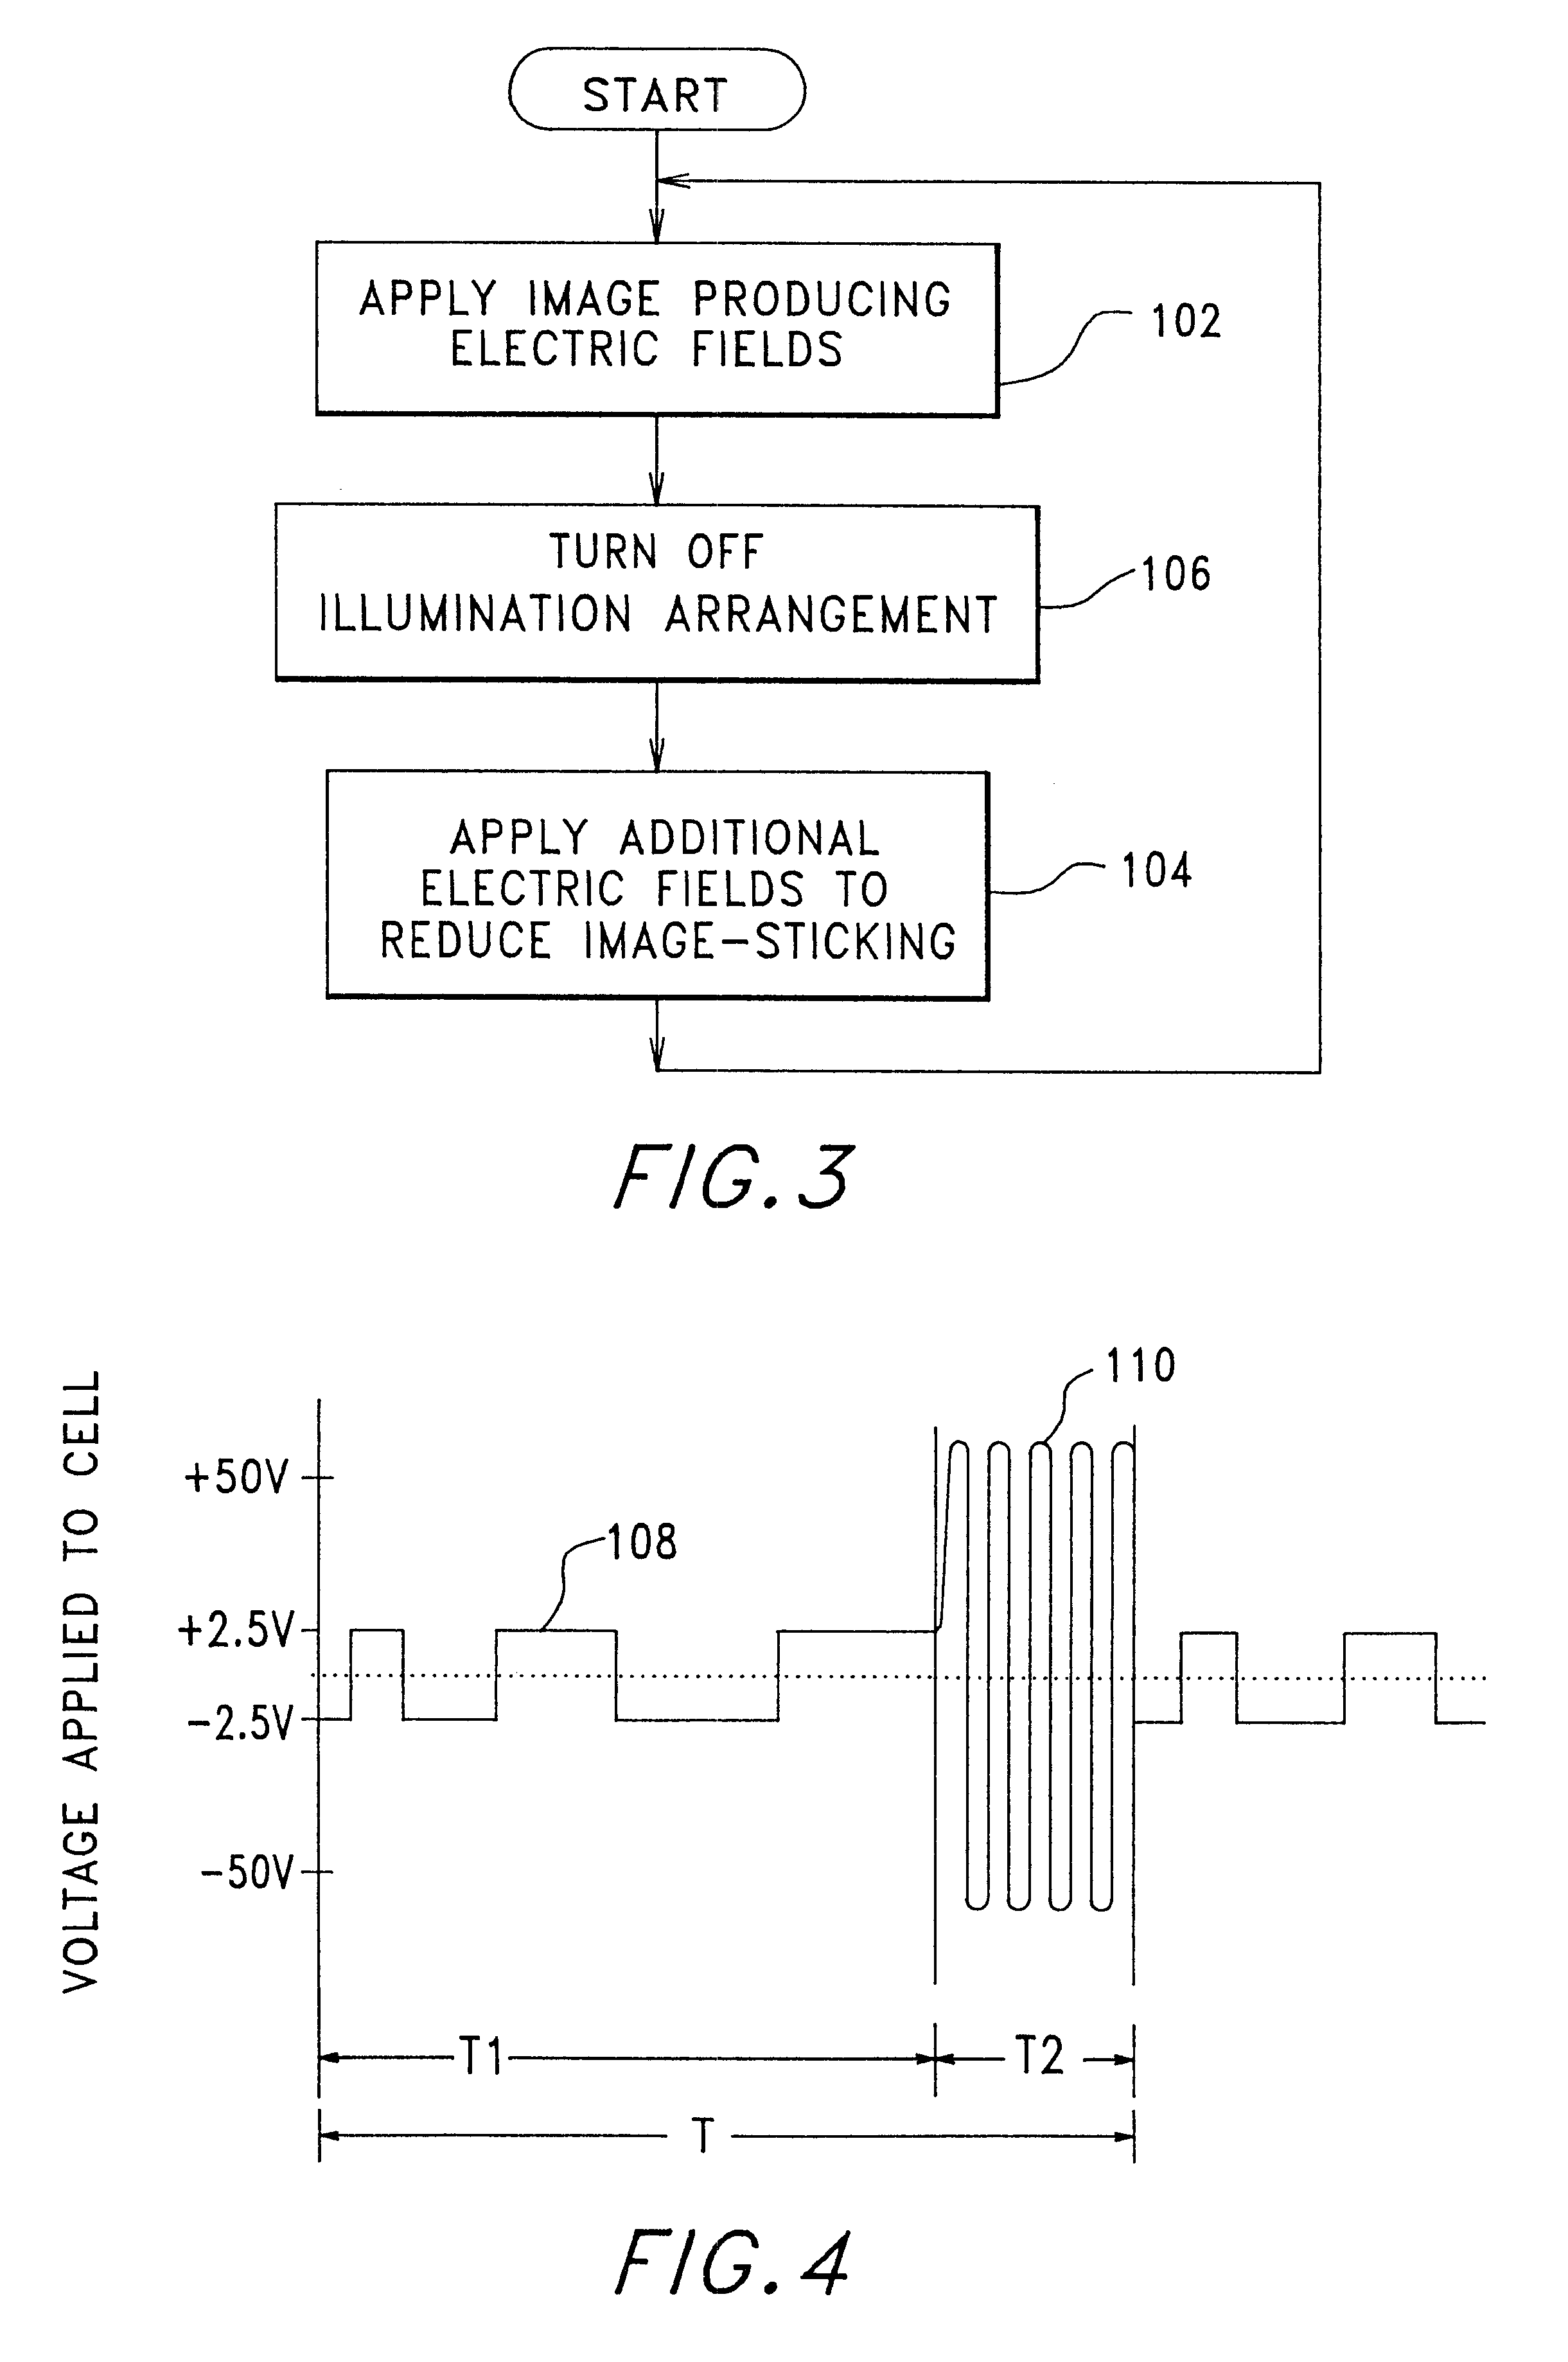 DC-balanced and non-DC-balanced drive schemes for liquid crystal devices